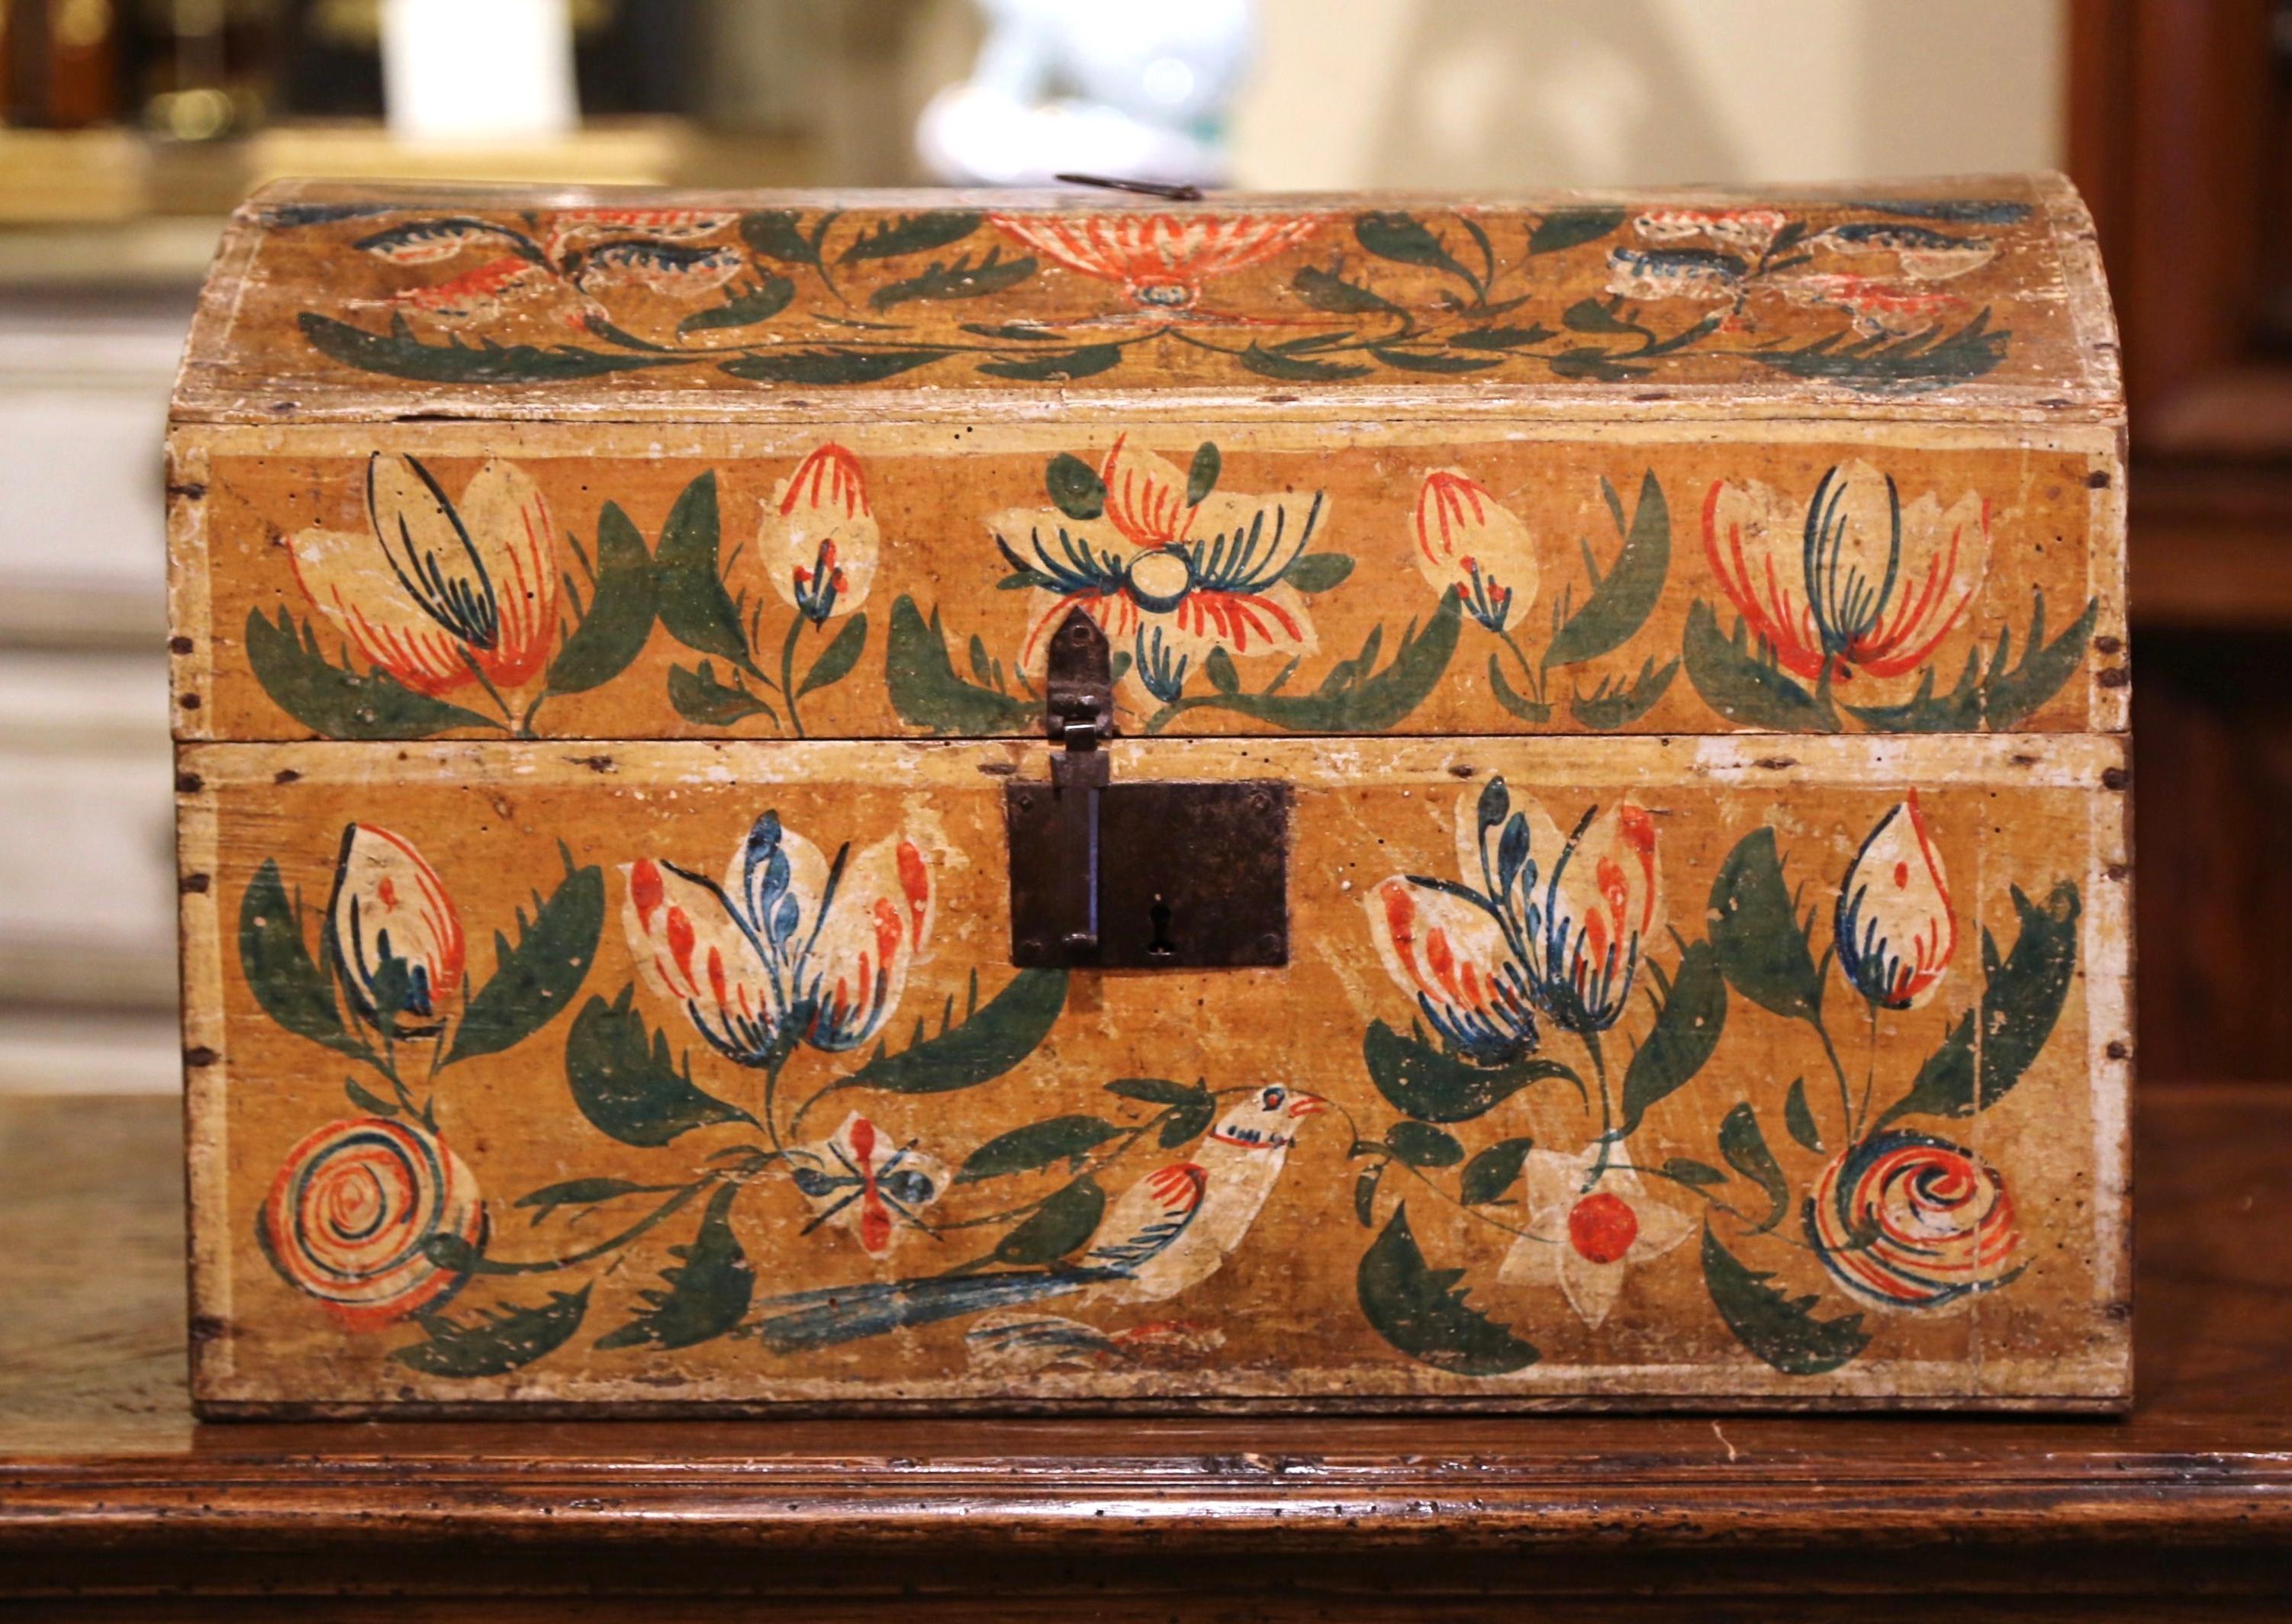 This beautifully executed antique wedding trunk was crafted in Normandy France, circa 1780. The colorful, arched box is decorated with multiple hand painted birds, flowers and leaves scattered on all four sides including on the bombe top; the small